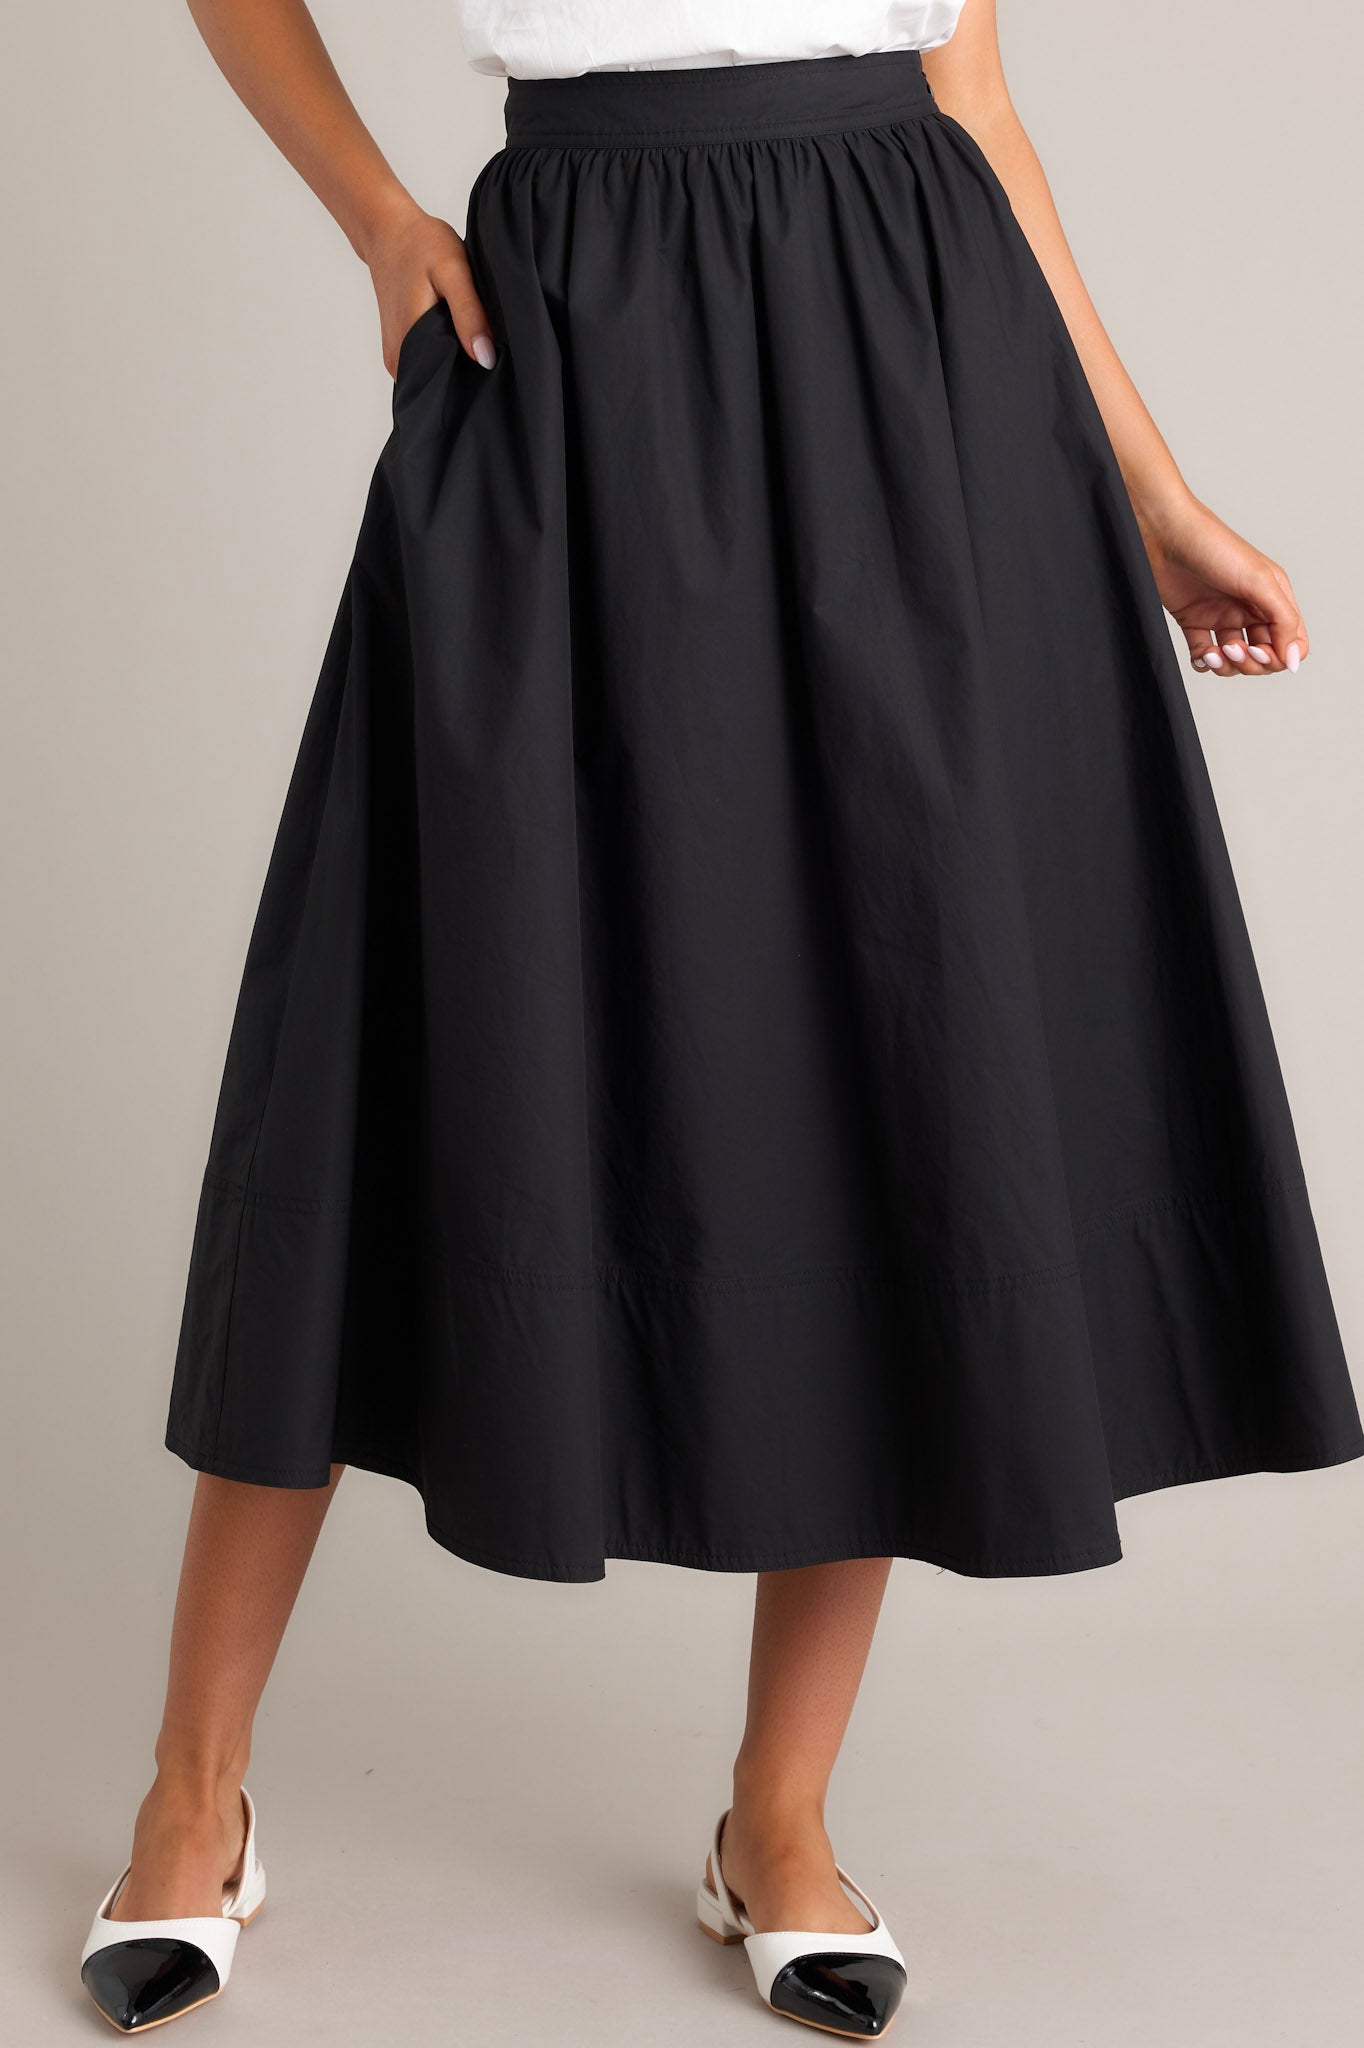 Front view of a black 100% cotton midi skirt featuring a high waisted design, functional hip pockets, and a thick hemline.